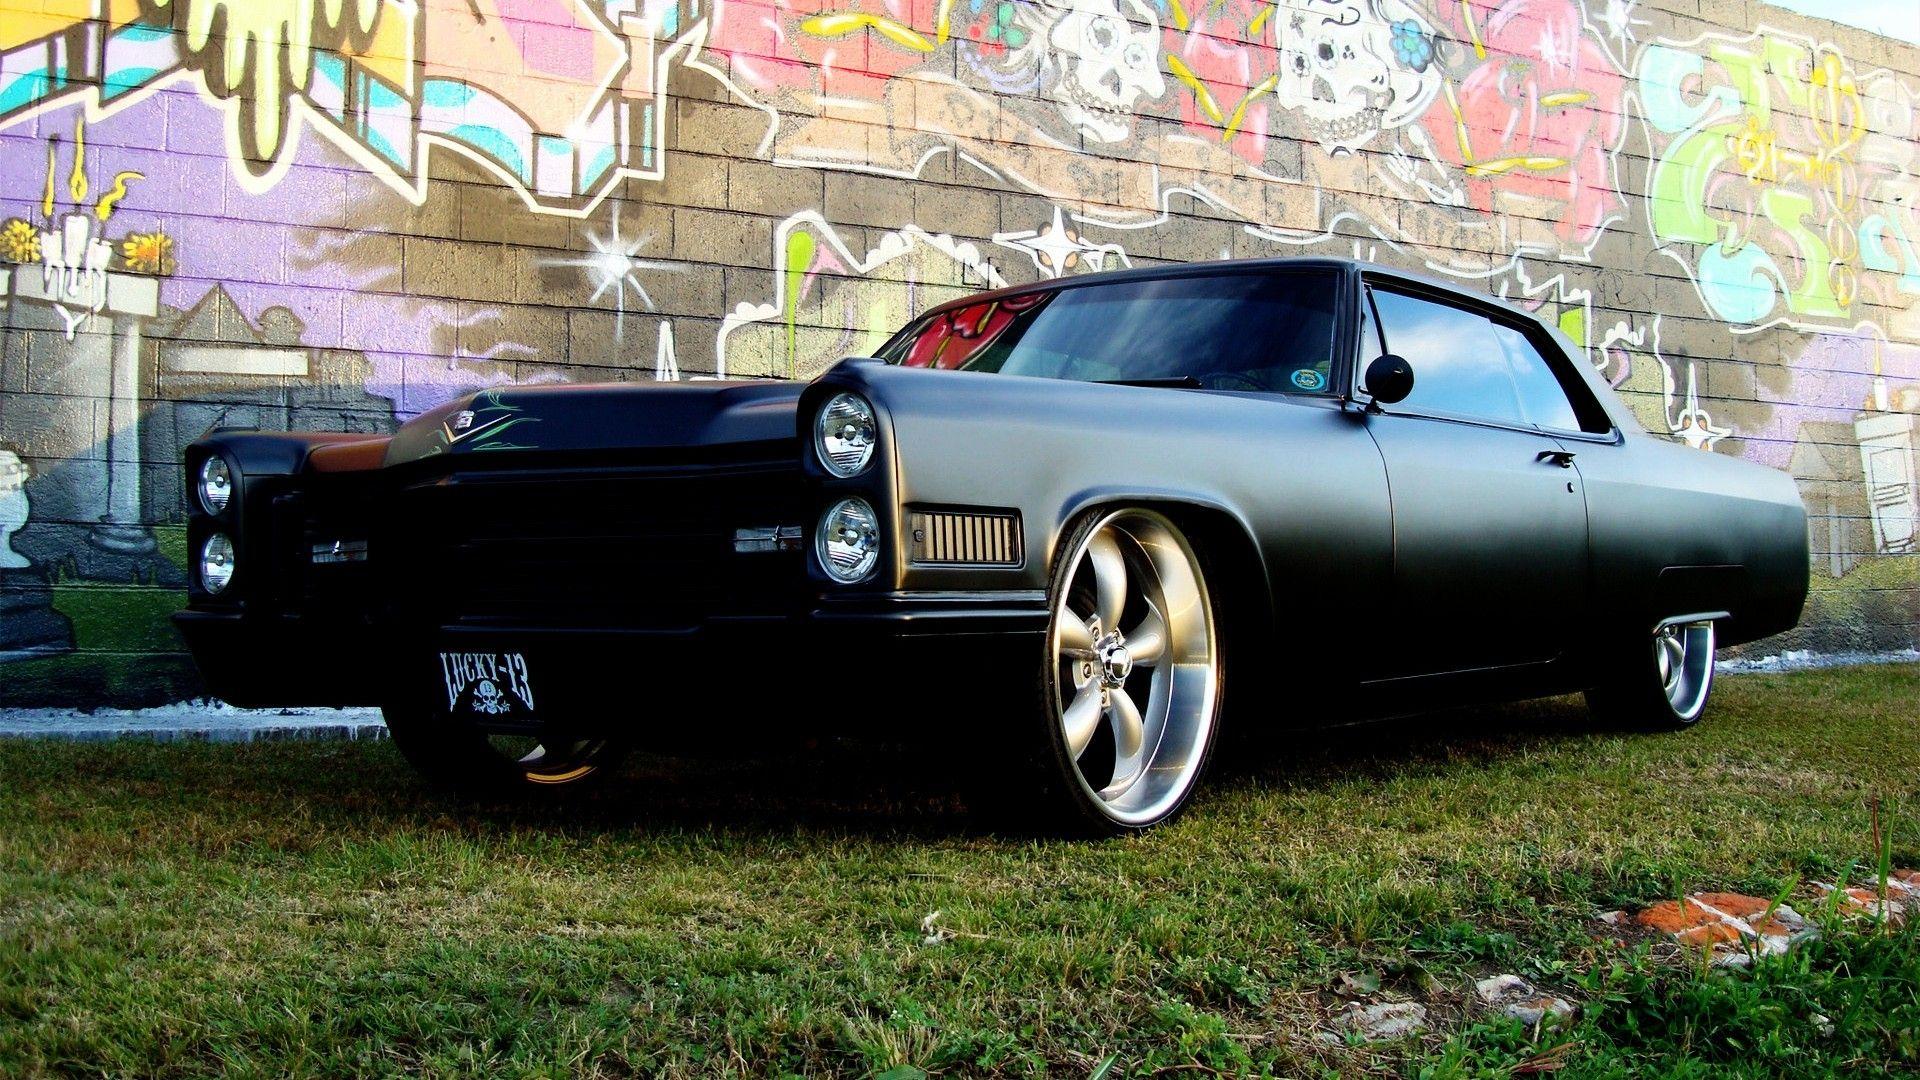 Download Wallpaper 1920x1080 chevrolet, tuning, muscle car